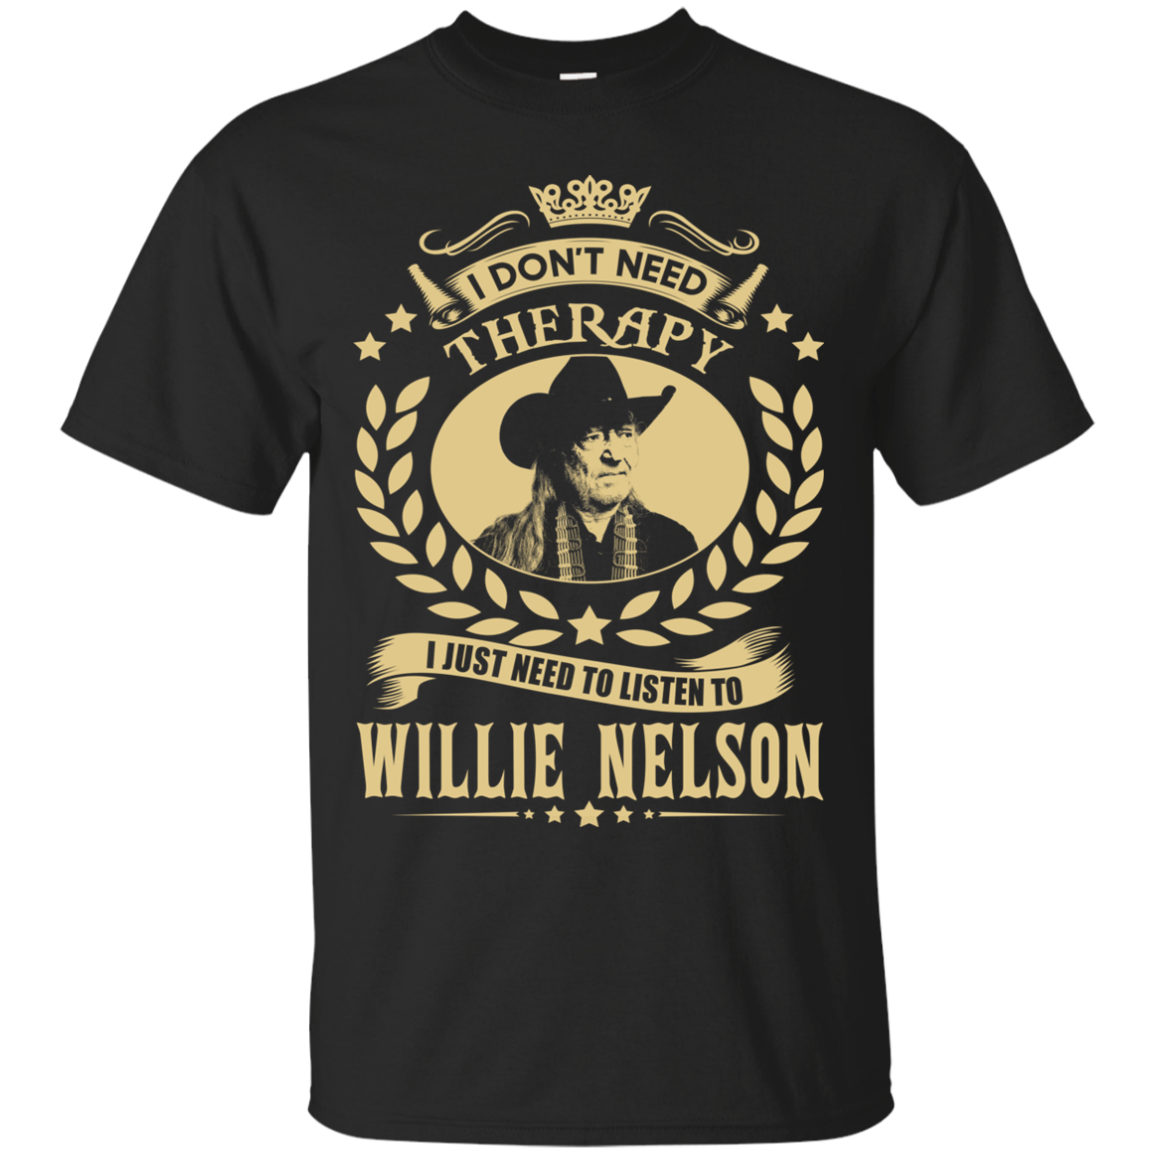 Willie Nelson Shirts I Just Need To Listen To Willie Nelson Teesmiley